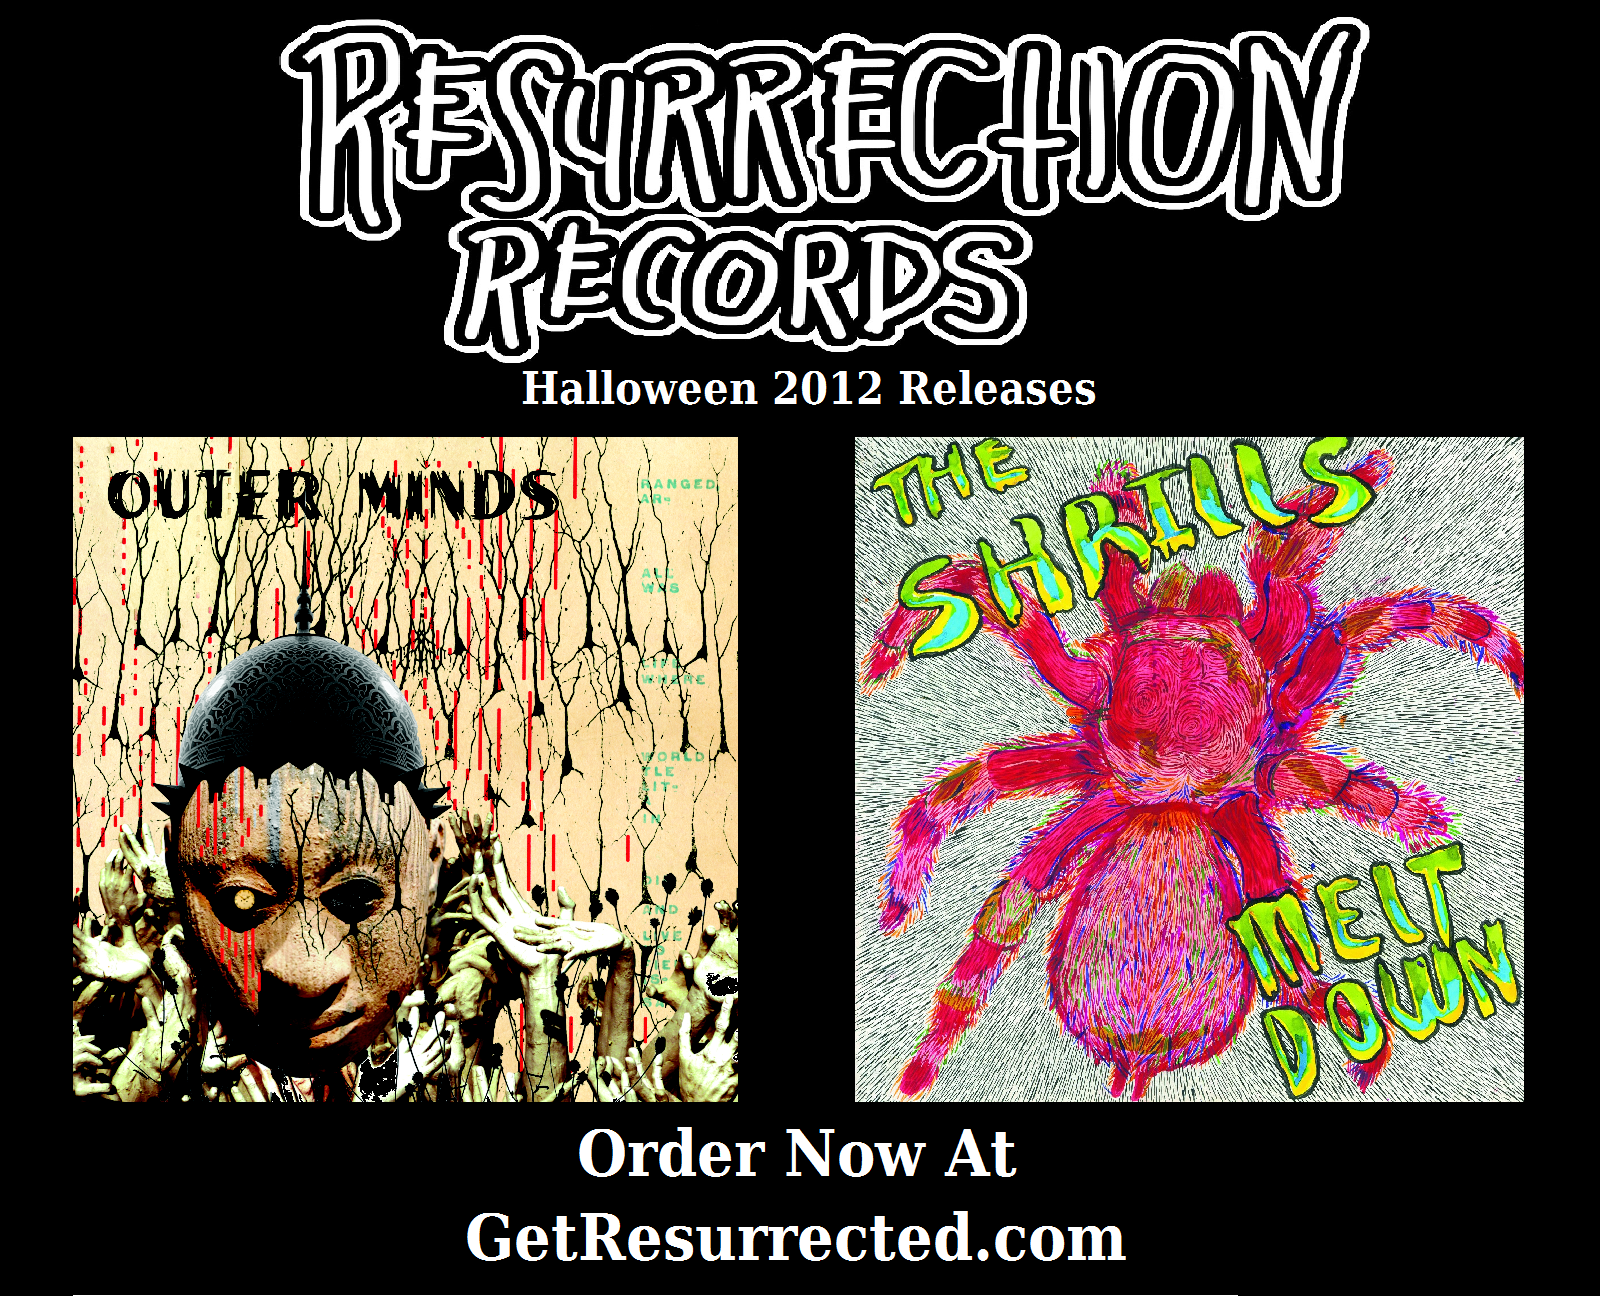 RESURRECTION HALLOWEEN COMBO PACK **INCLUDES BOTH THE NEW OUTER MINDS LP & THE SHRILLS LP**